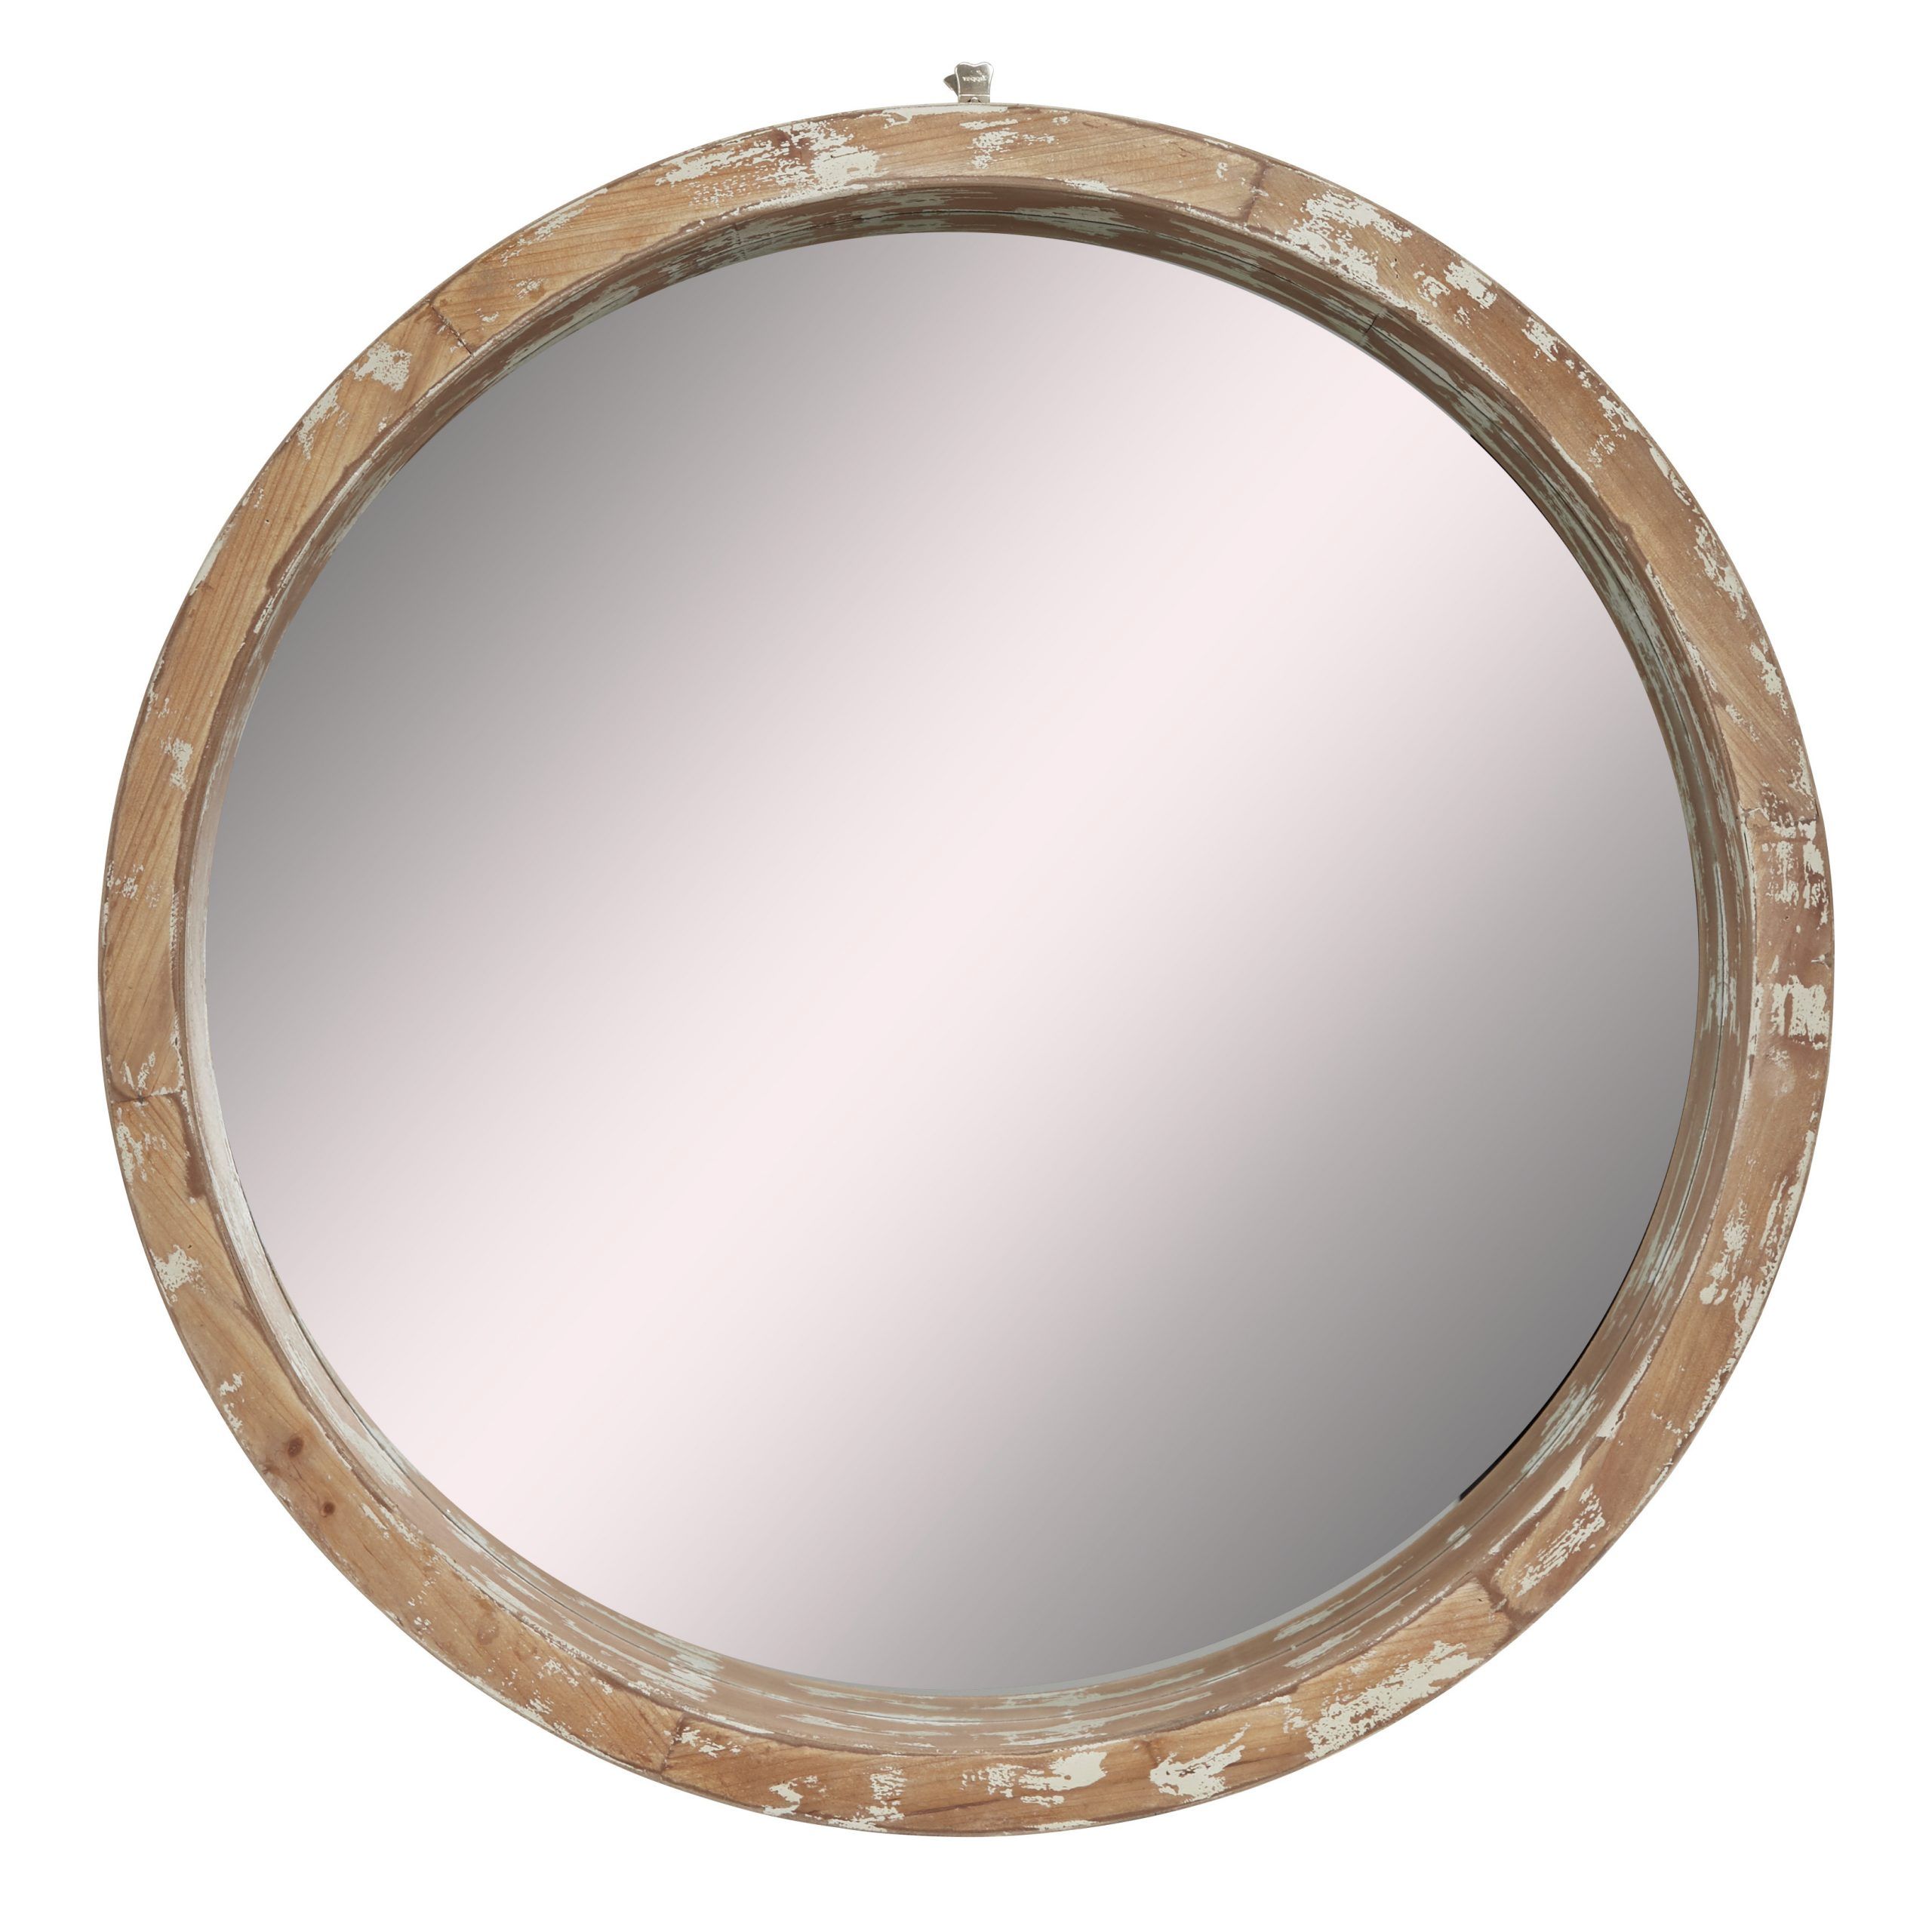 Decmode Vintage Style Distressed Large Round Wood Wall Mirror, 39" X 39 Intended For Current Round Stacked Wall Mirrors (View 3 of 15)